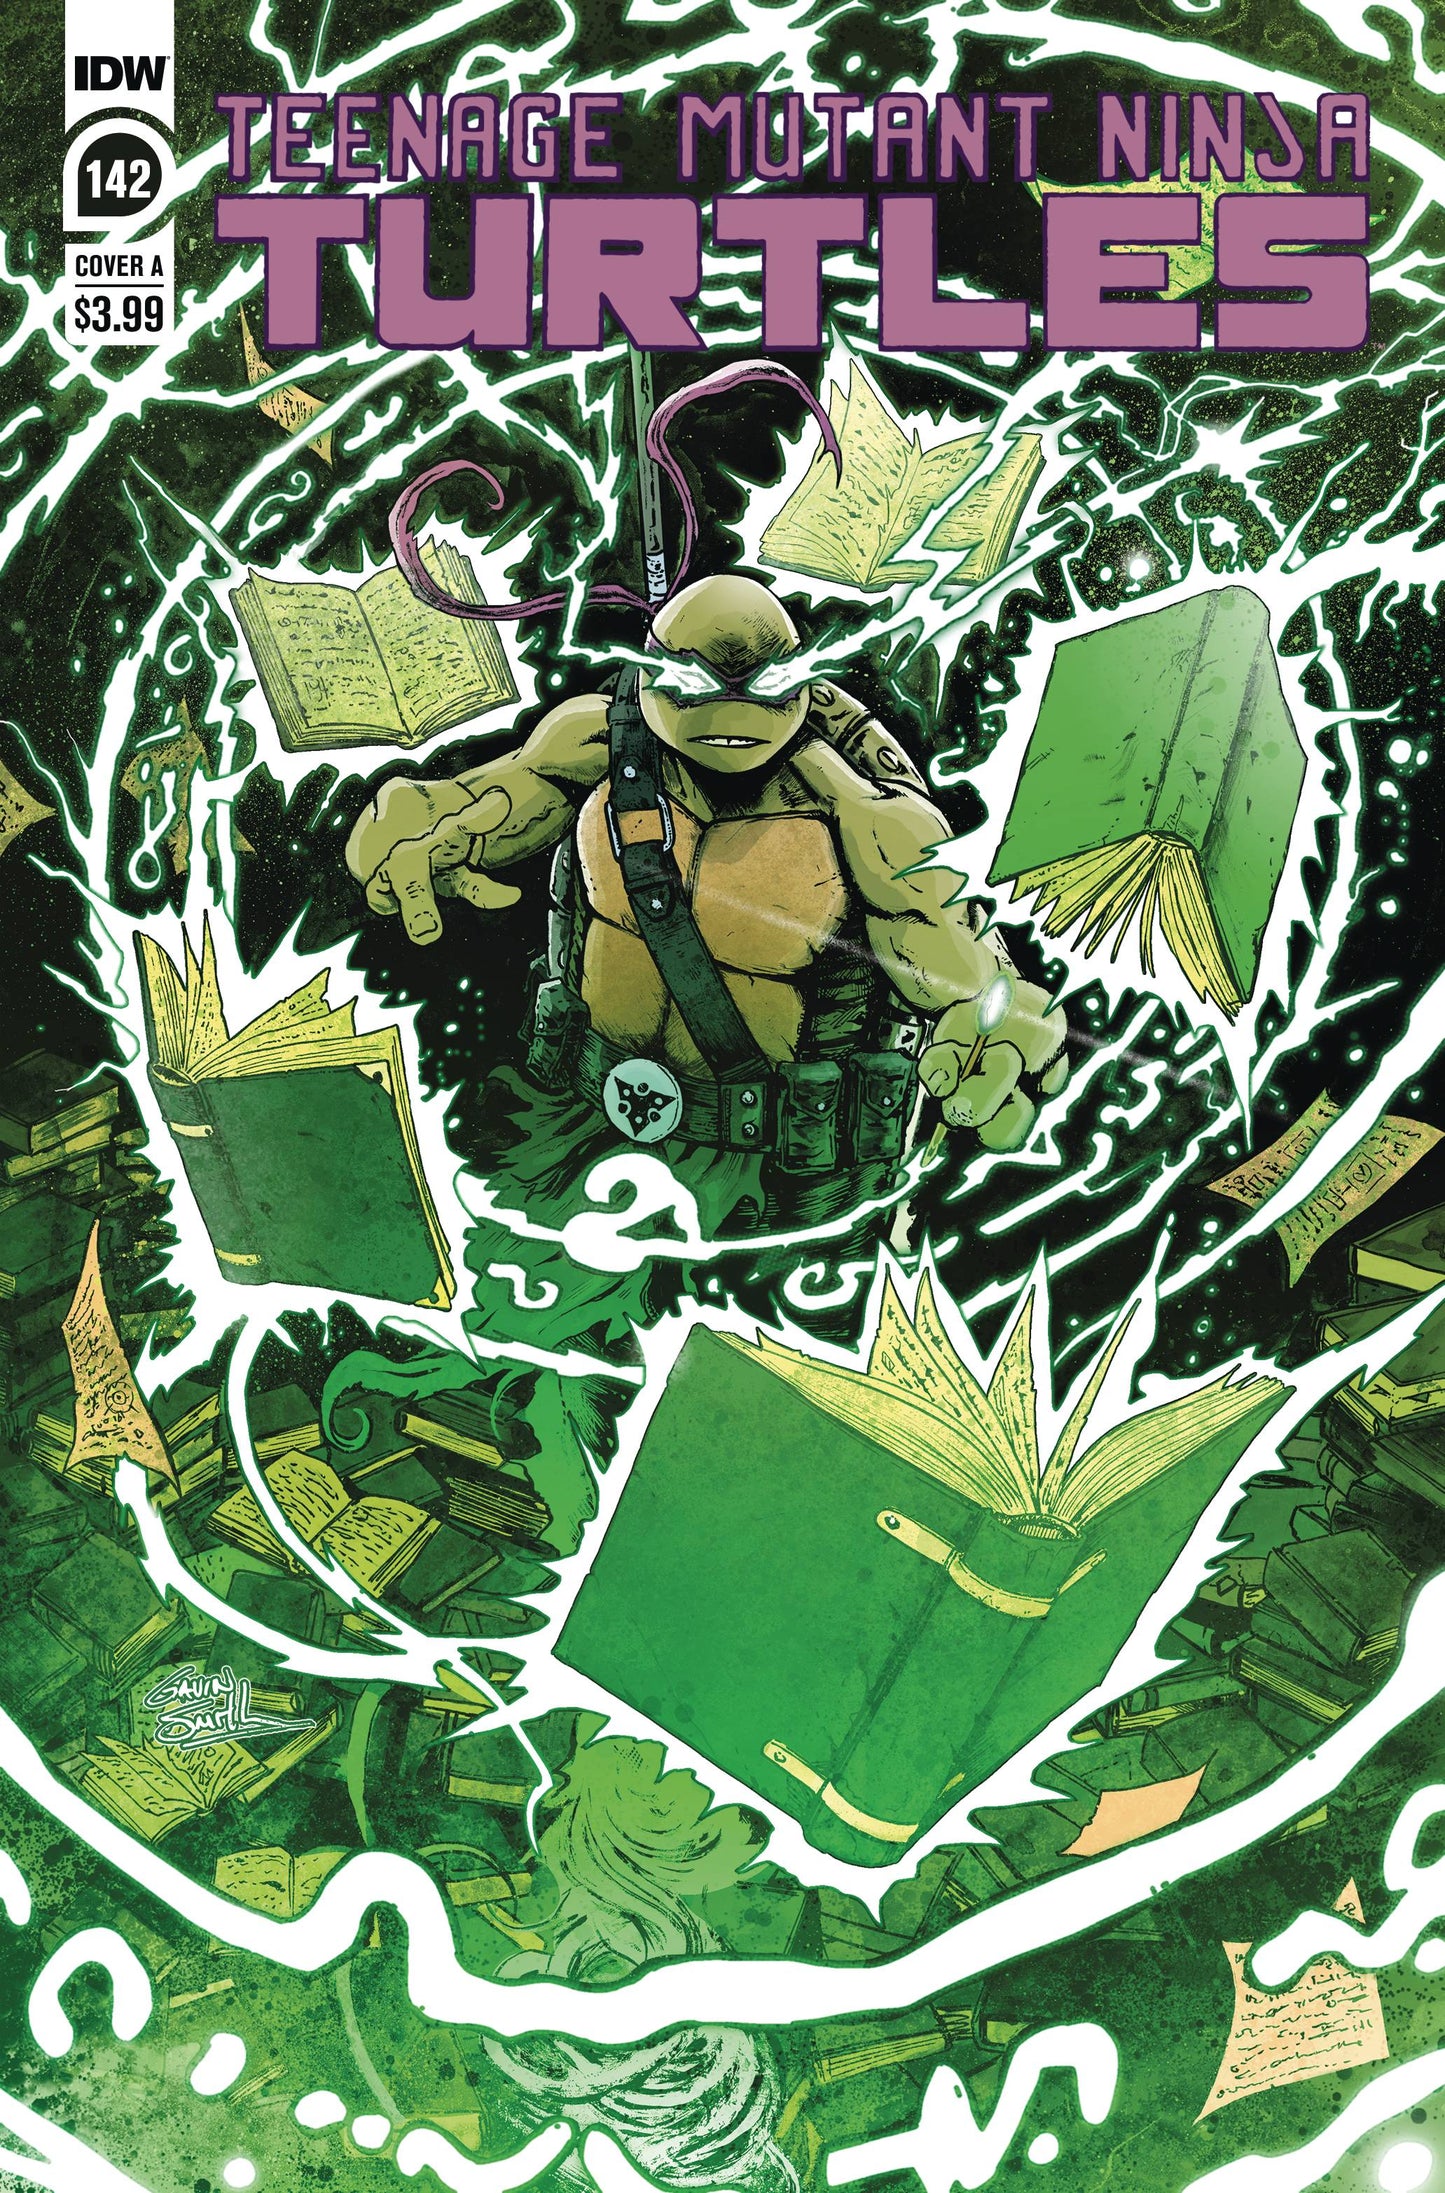 TMNT ONGOING #142